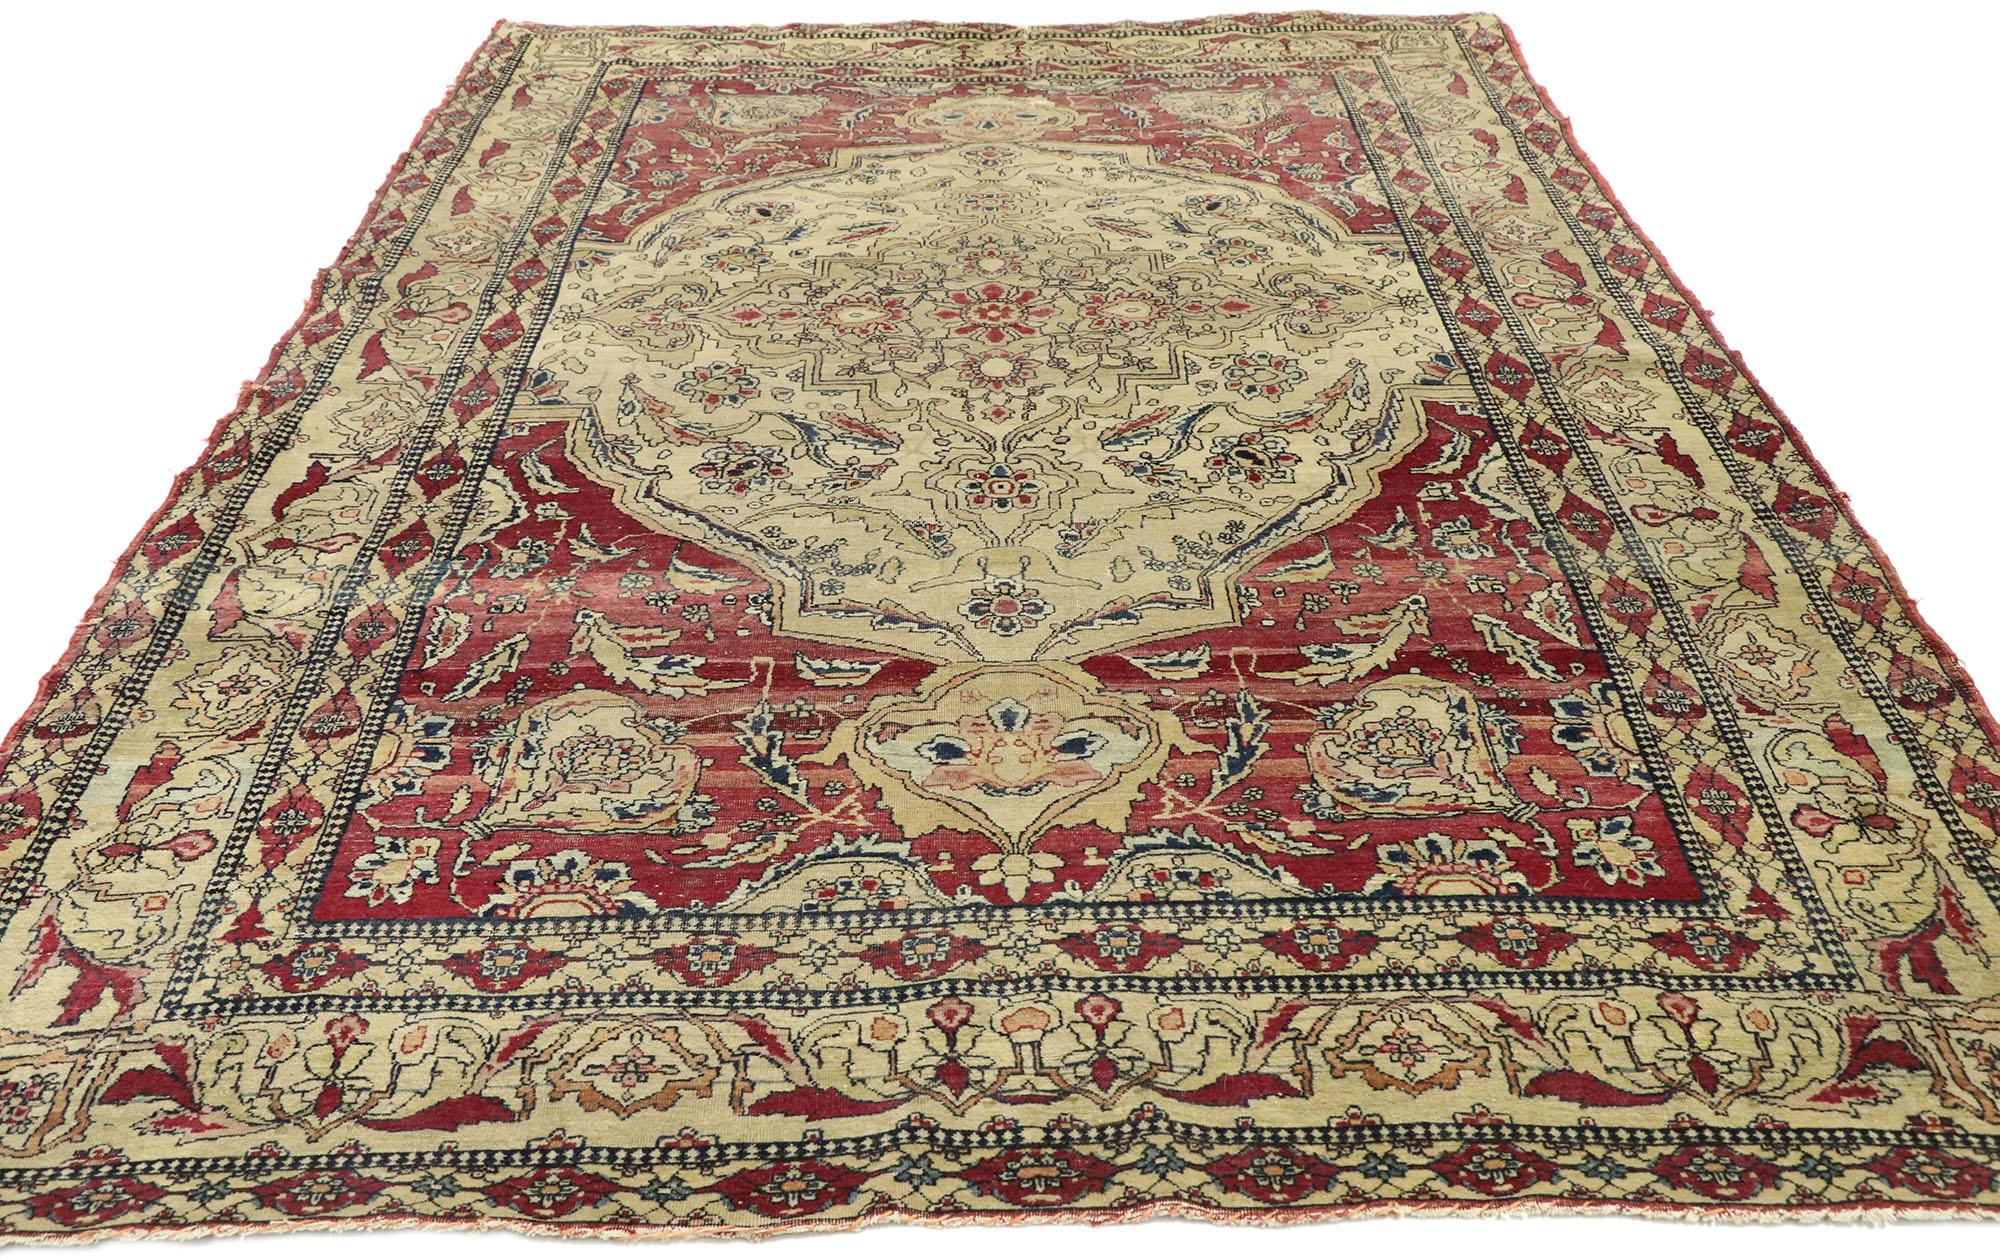 Kirman Distressed Antique Persian Kerman Rug with Modern Rustic English Style For Sale